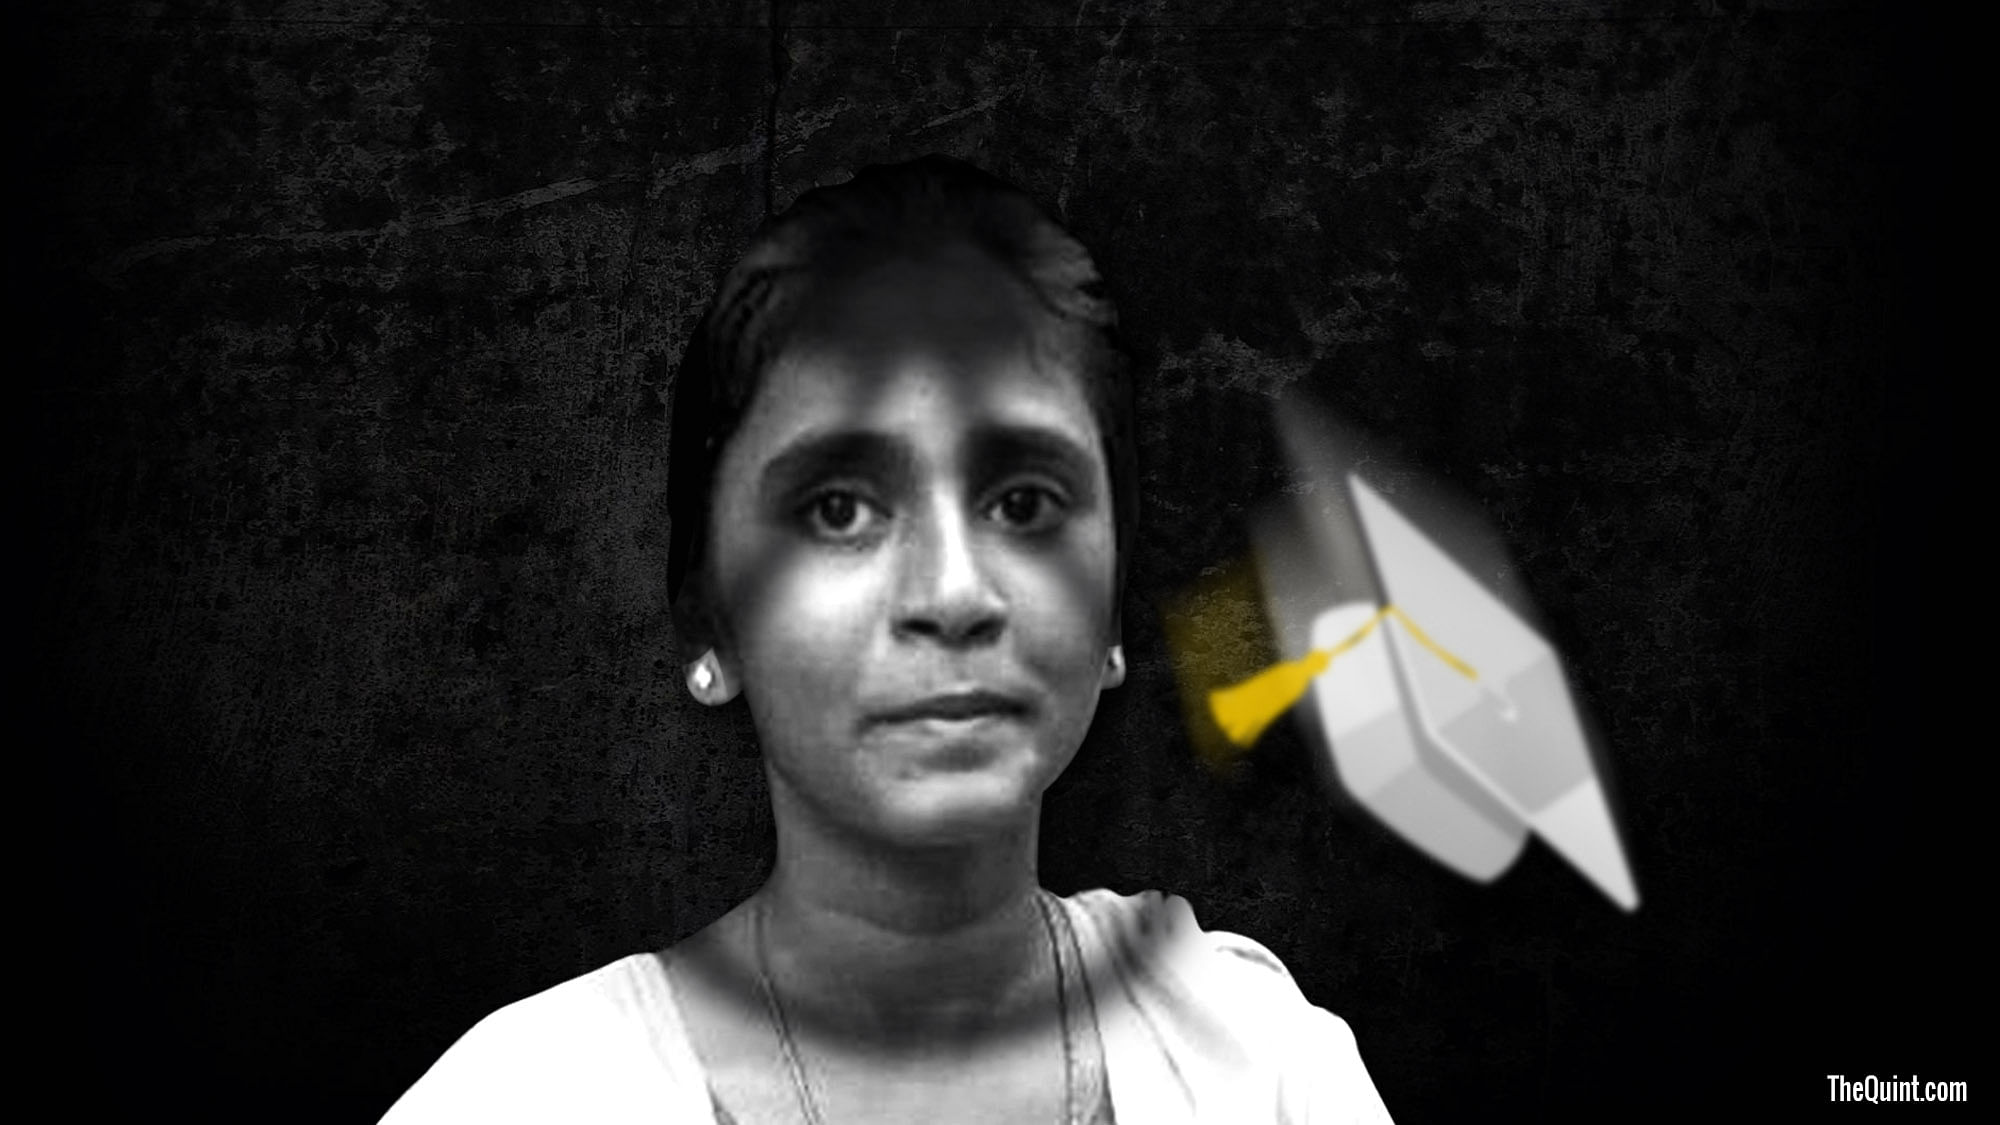 

Tamil Nadu’s flawed education policy that doesn’t enable rural students for competitive exams led to Anitha’s death.